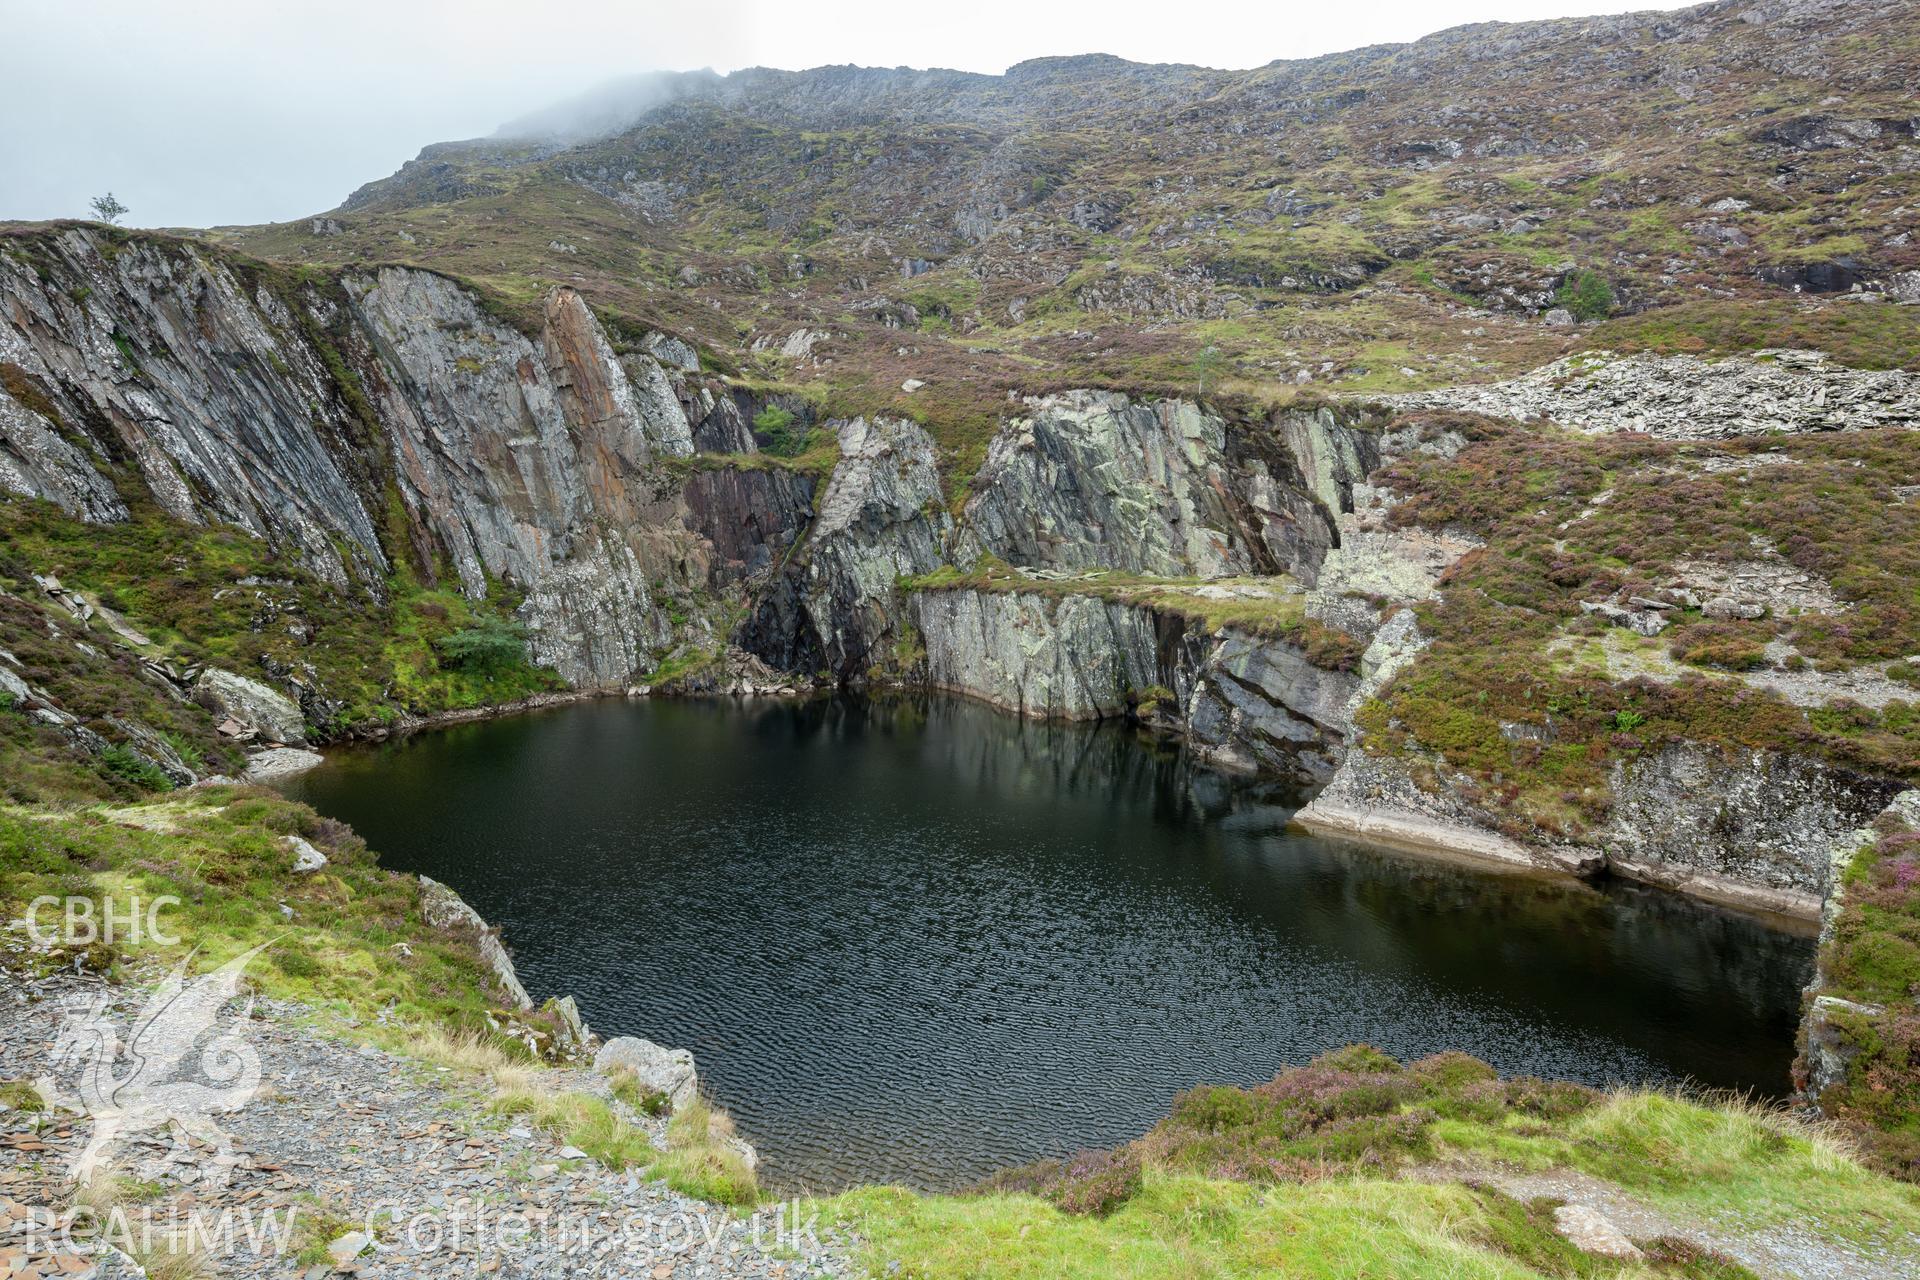 Flooded quarry pit from the east